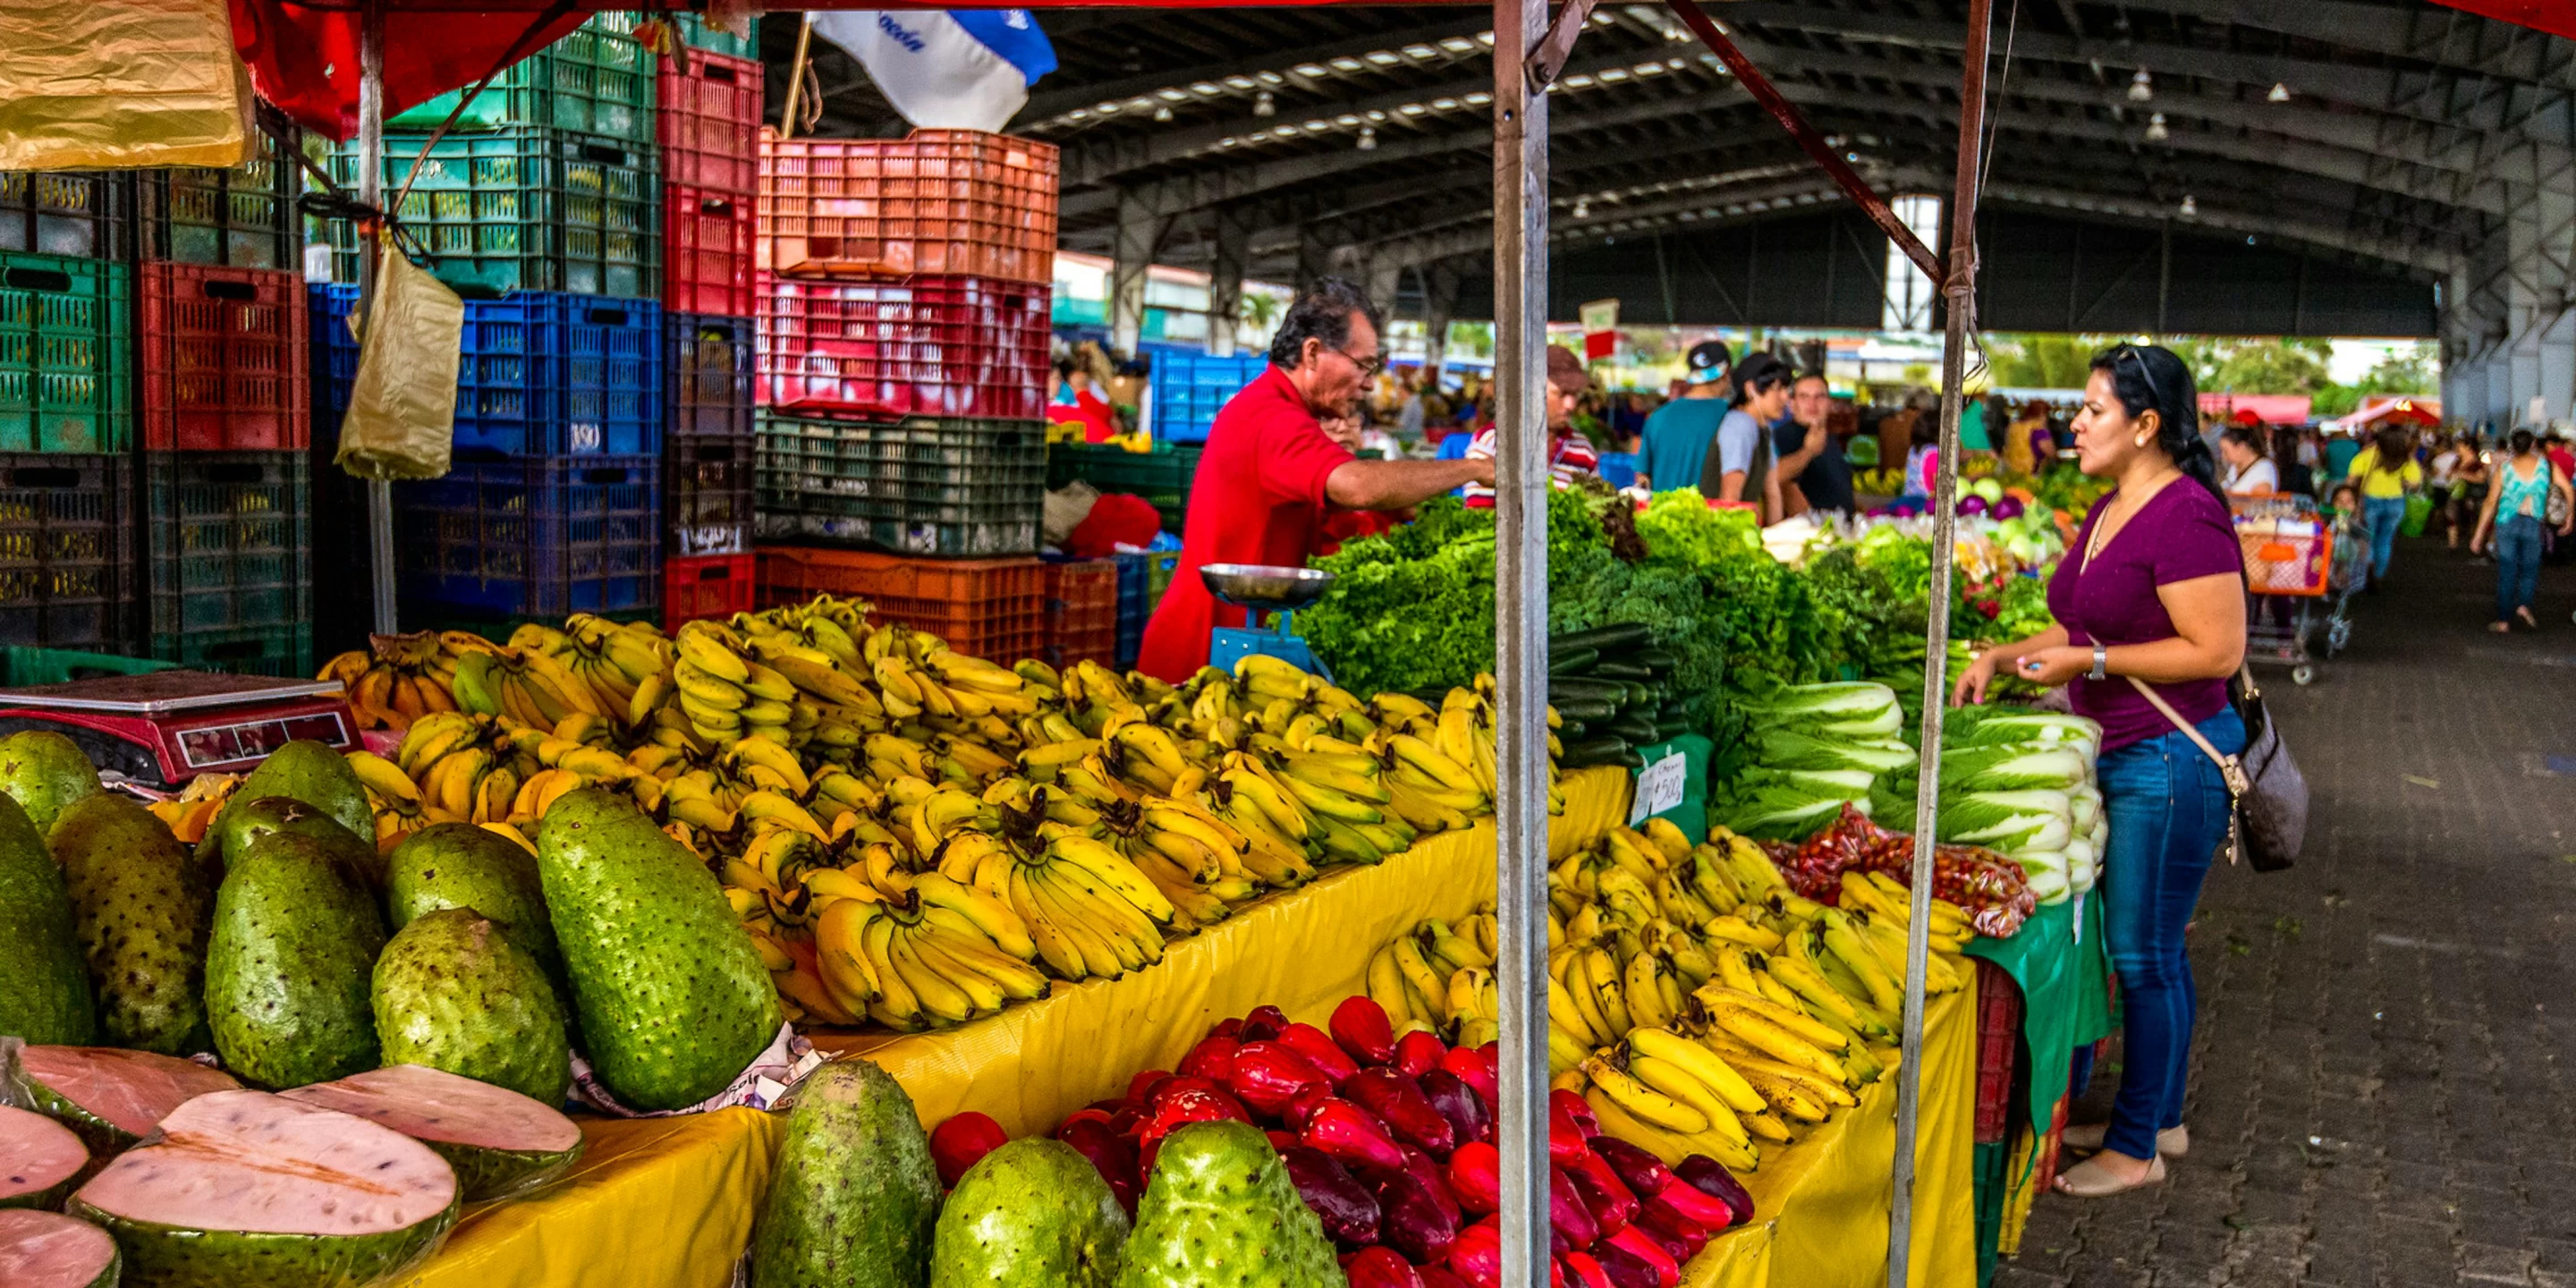 Enjoy exploring Quepos's flavors, crafts, live music, and culture at this farmer’s market!